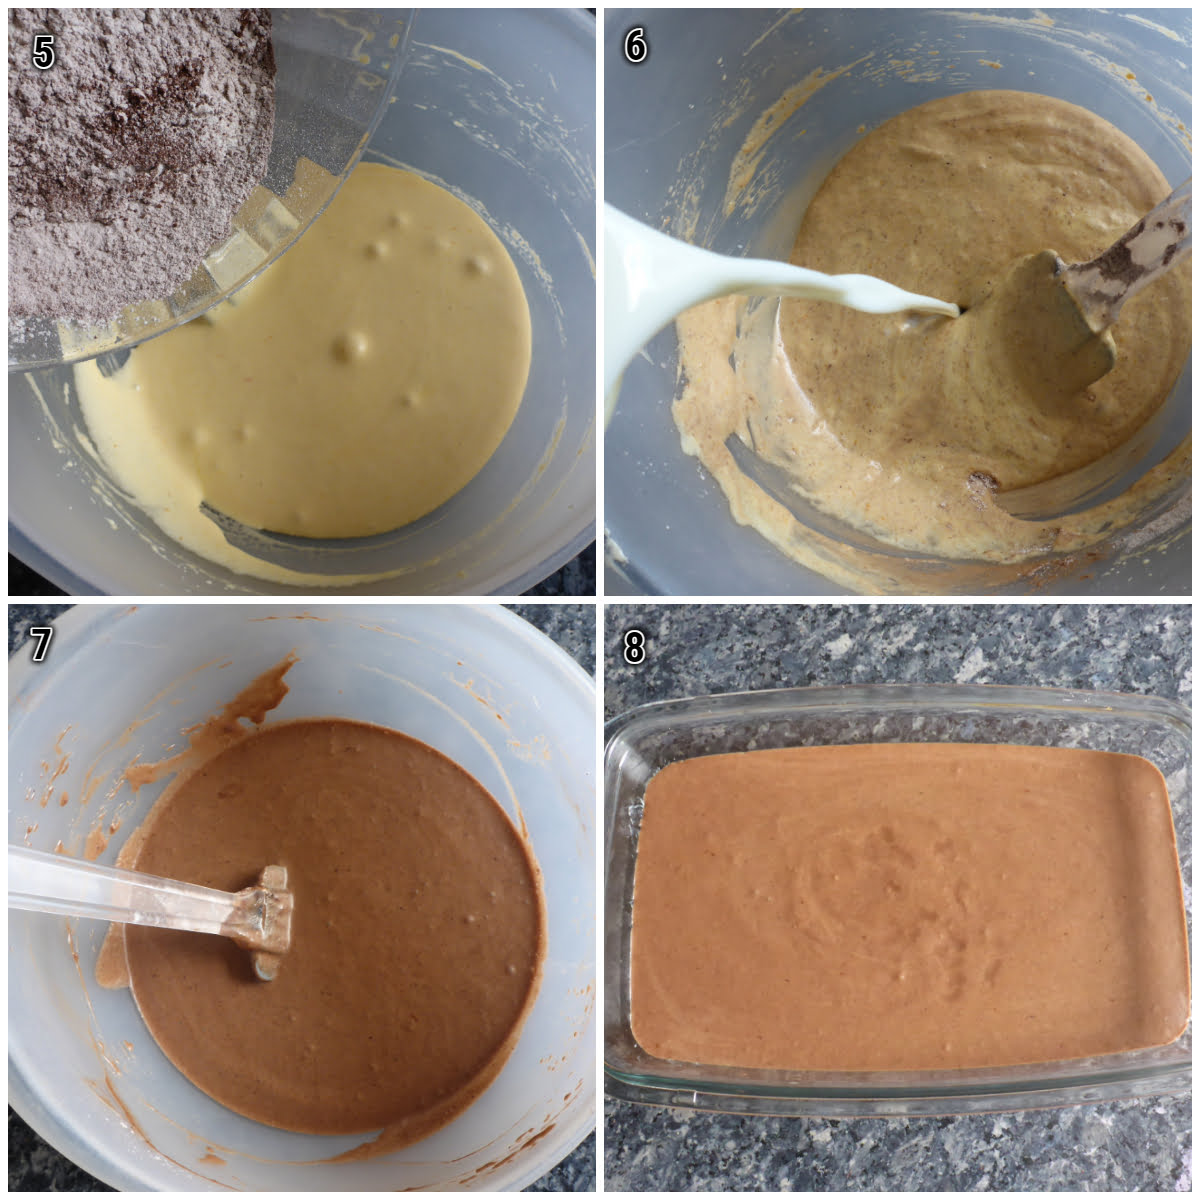 How to make South African malva pudding with cocoa powder.